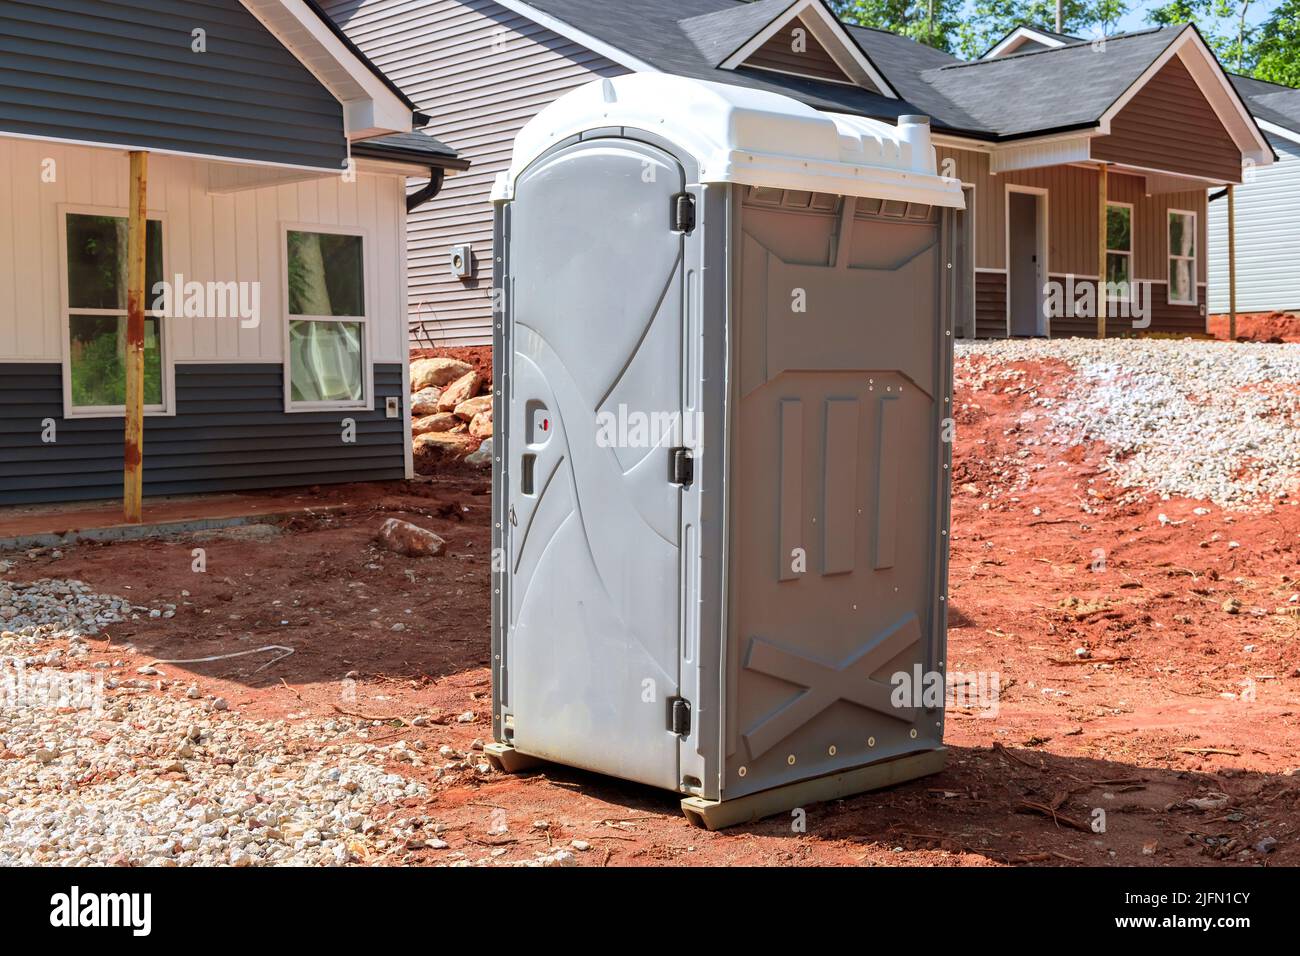 A portable restroom is being used at a construction site near a house that is being built Stock Photo